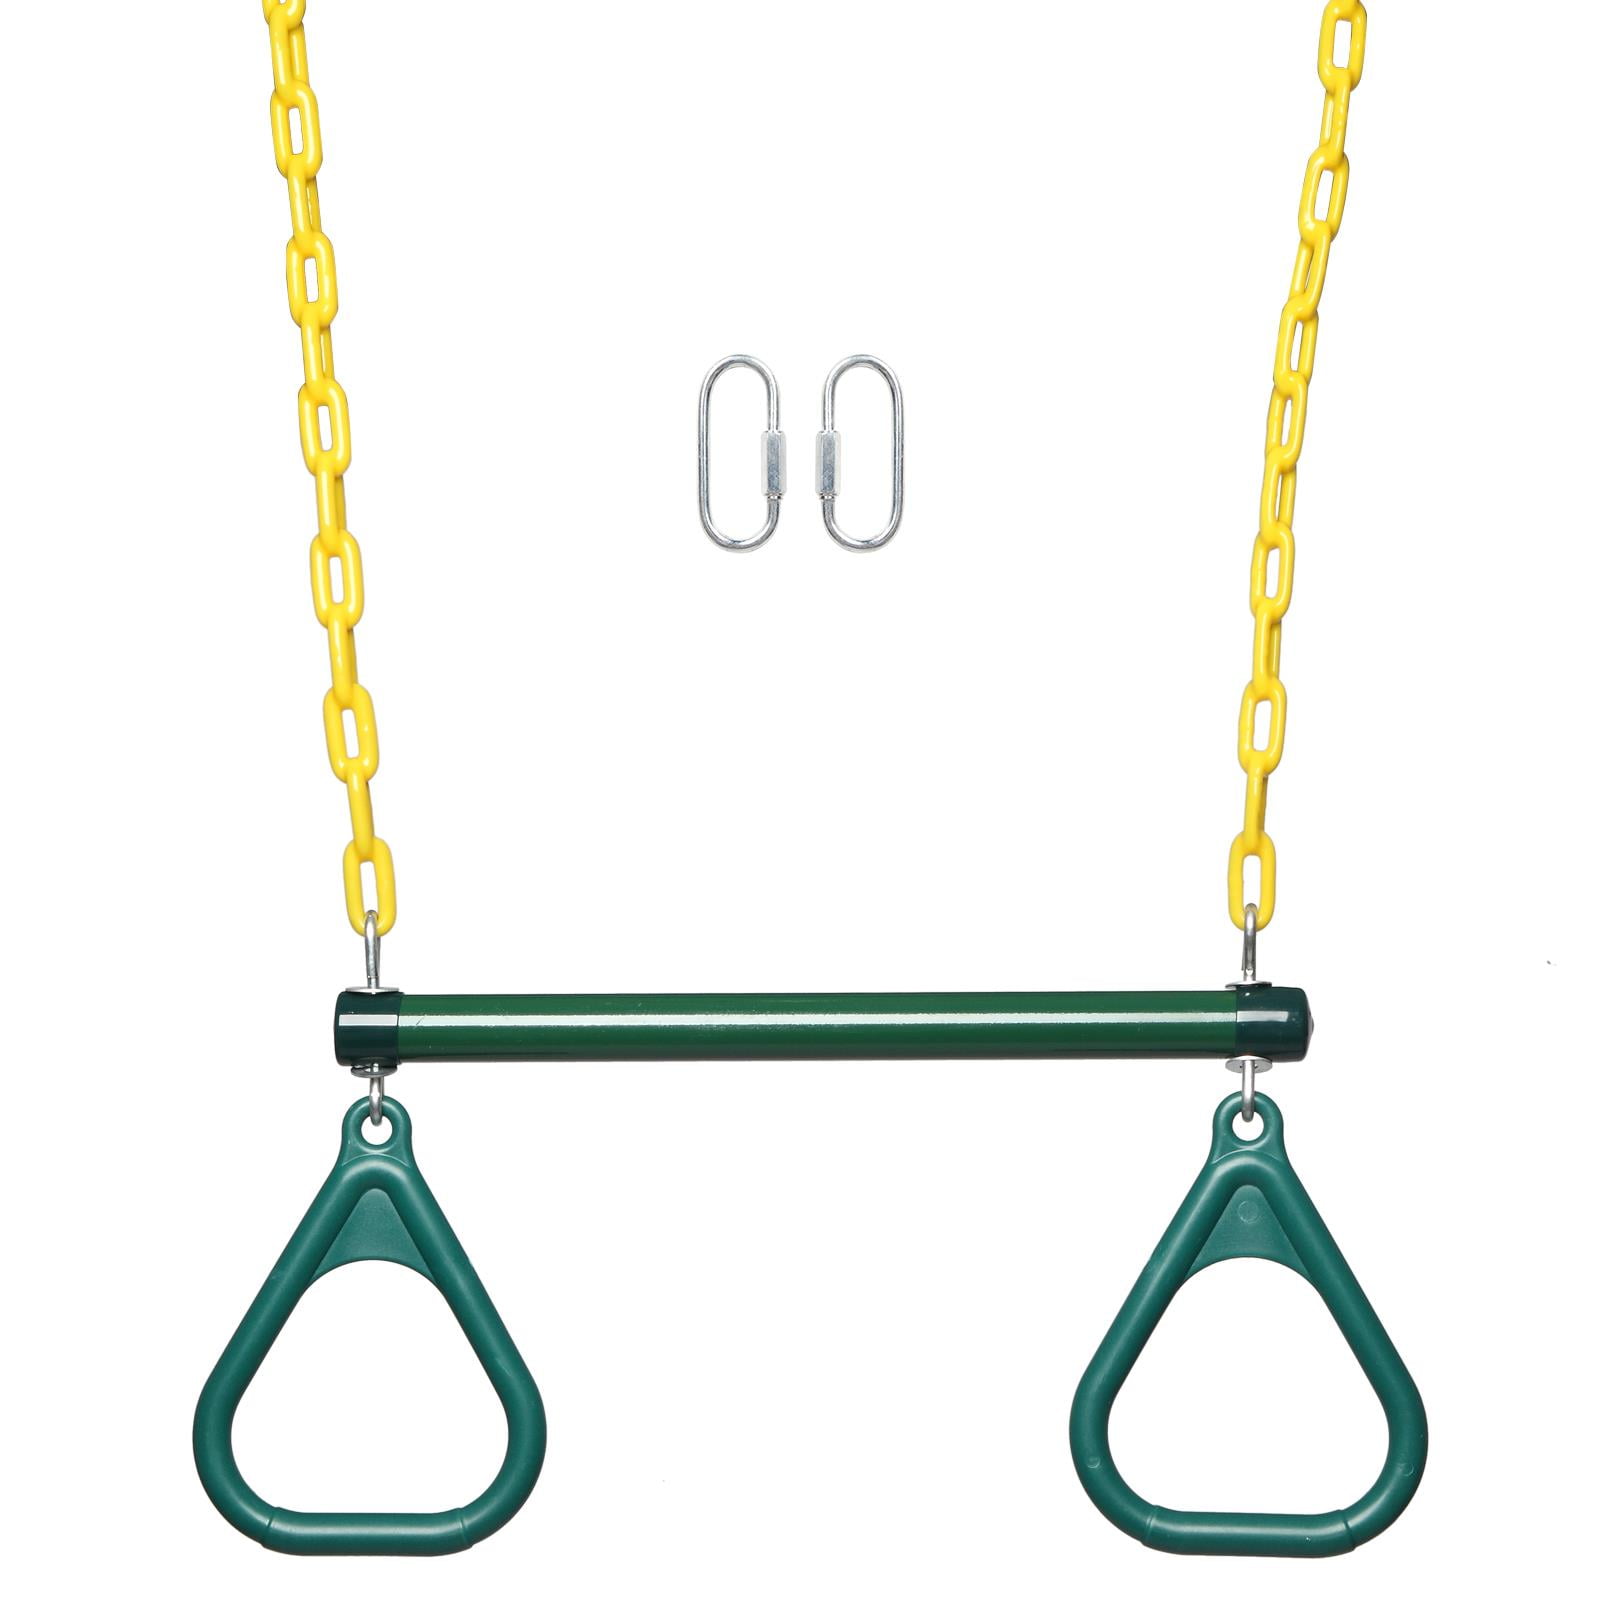 Details about   Heavy Duty Swing Seat Swing Set Accessories with Coated Rust-Proof Chain for kid 